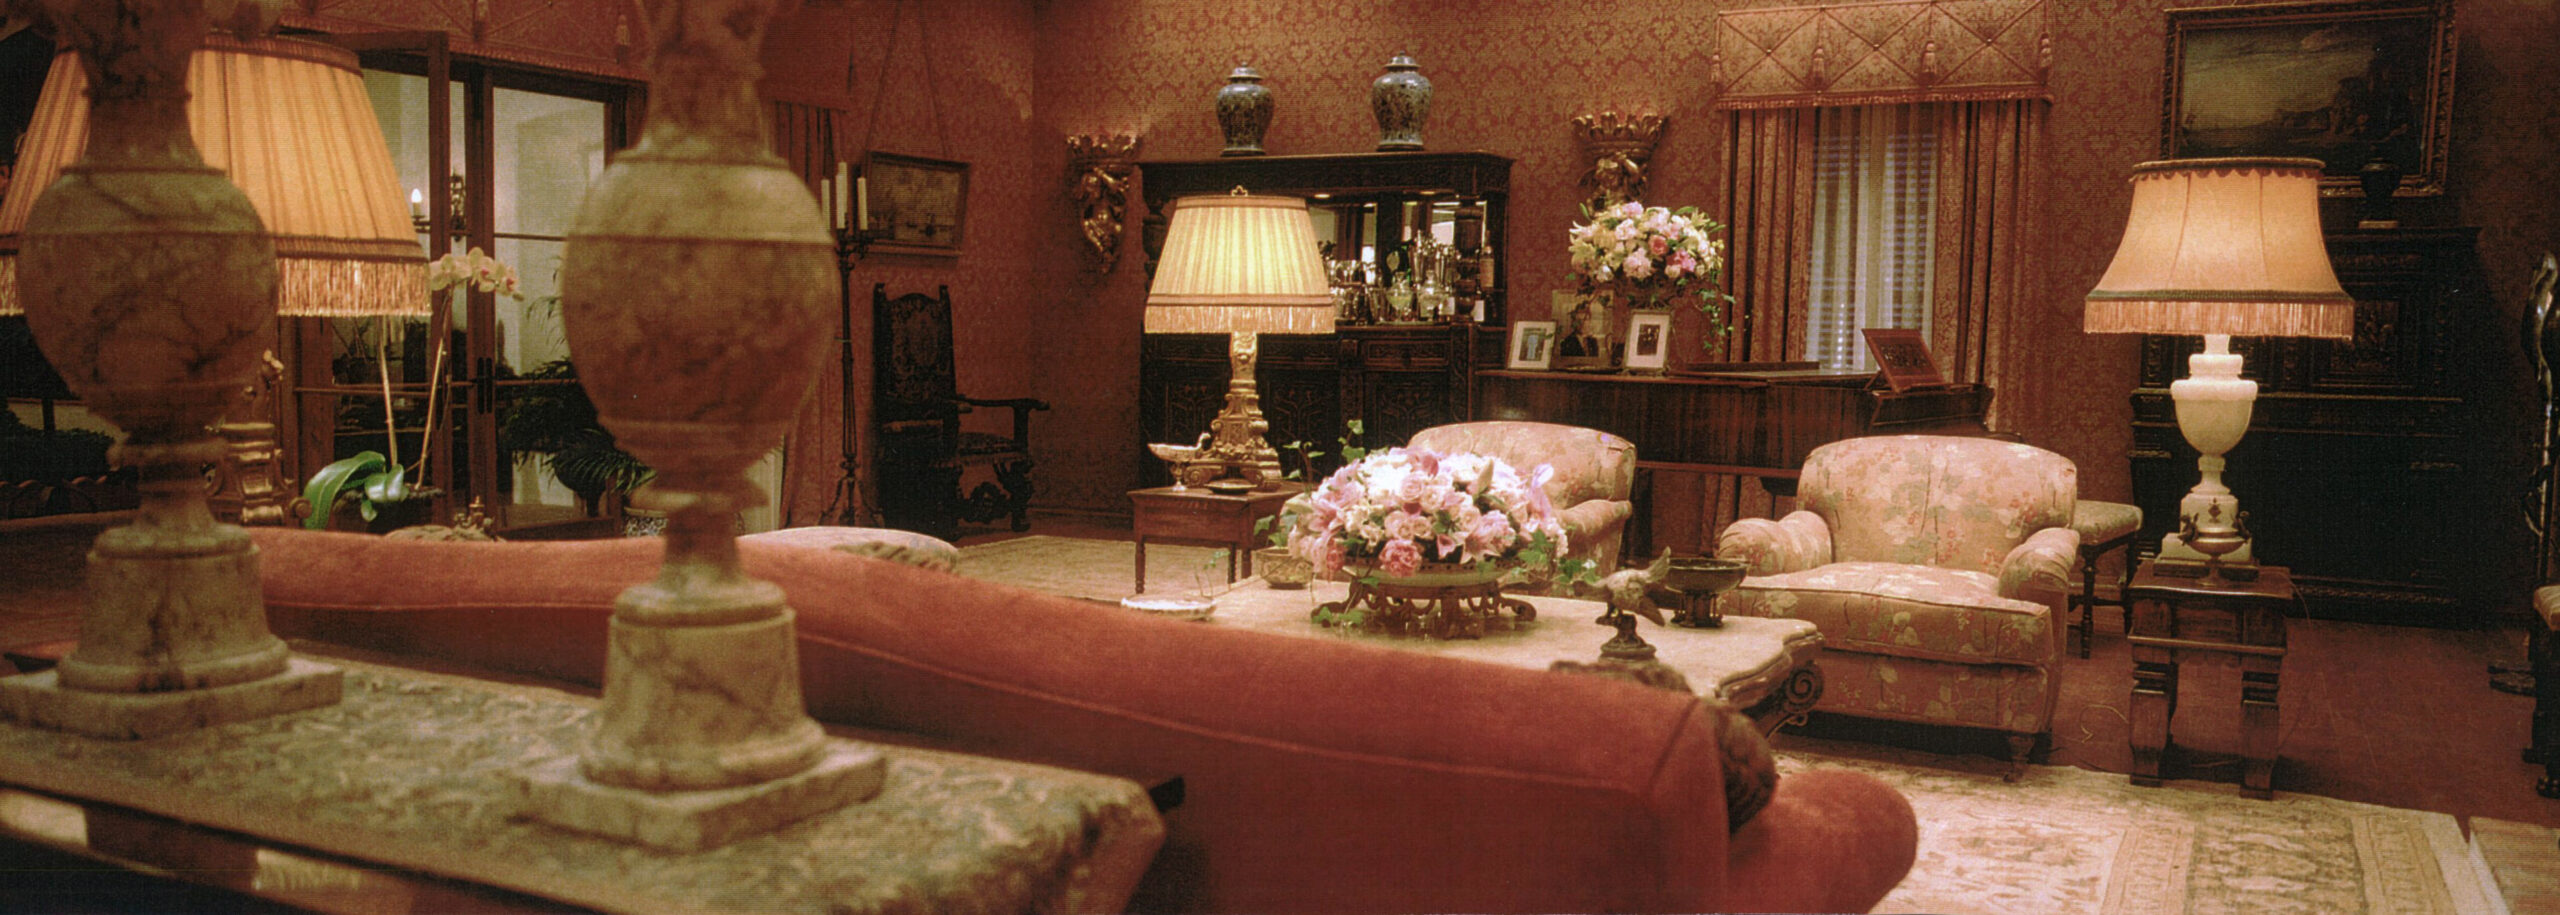 THE AVIATOR - Directed by Martin Scorsese - Int. Howard Hughes’s House, Stage Set - ©2004 - Miramax Films